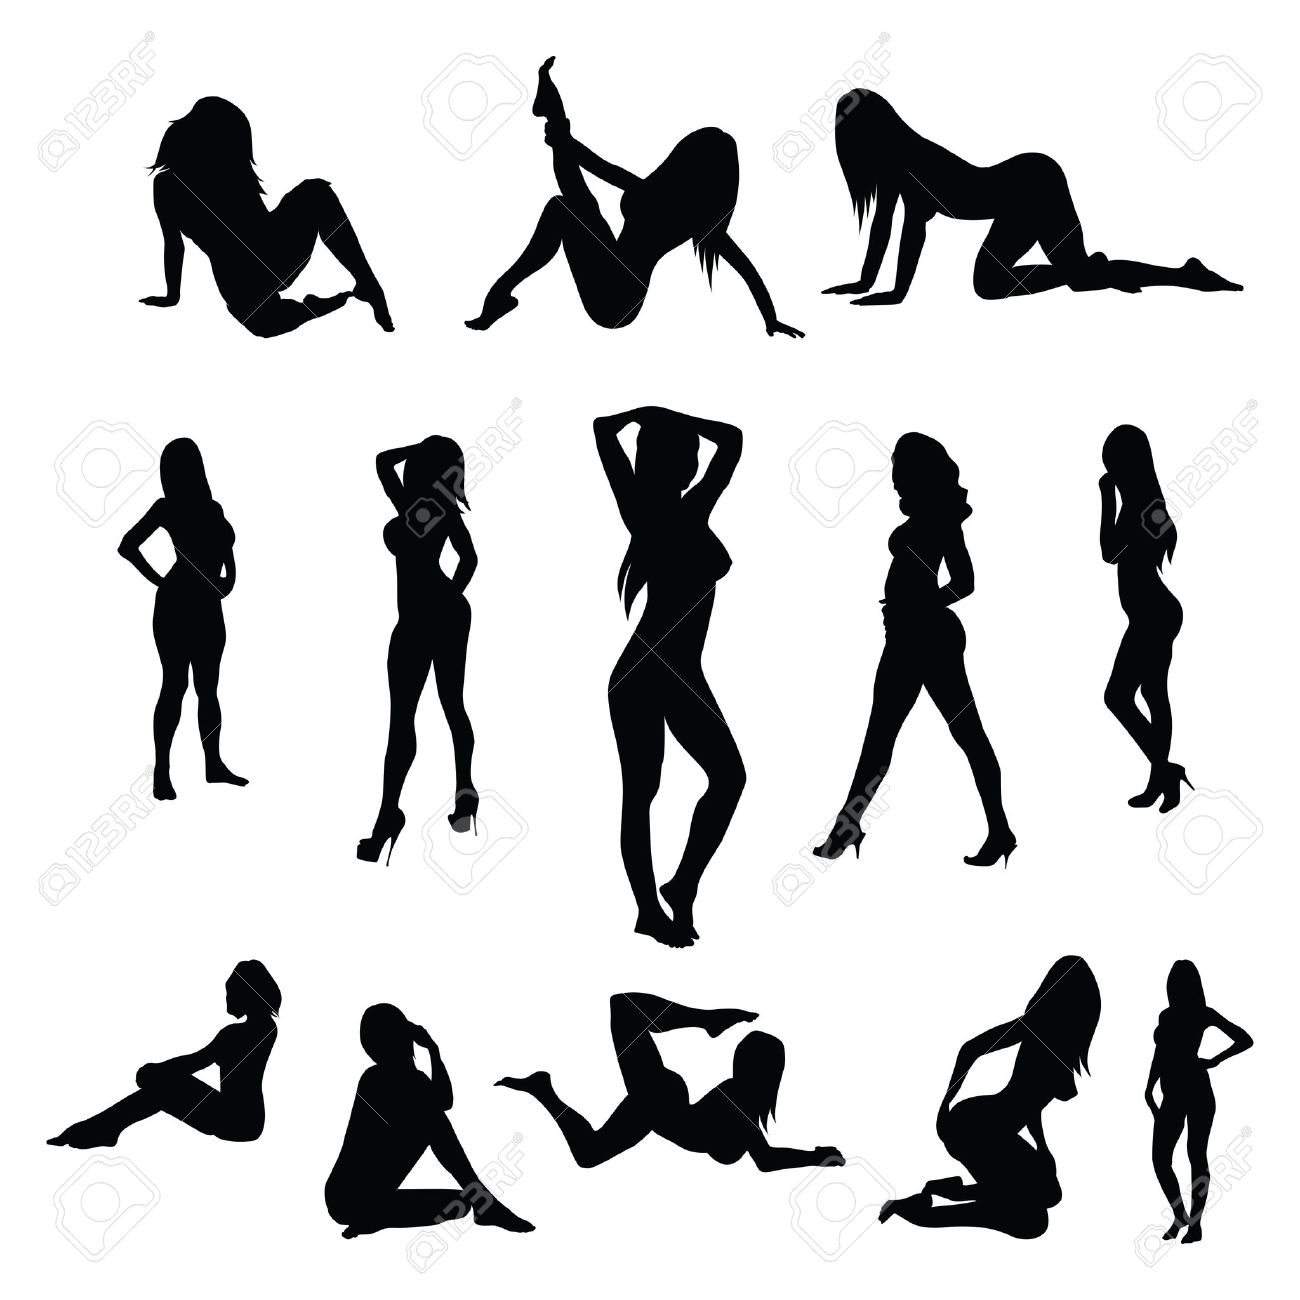 ashley crowder recommends women in seductive poses pic